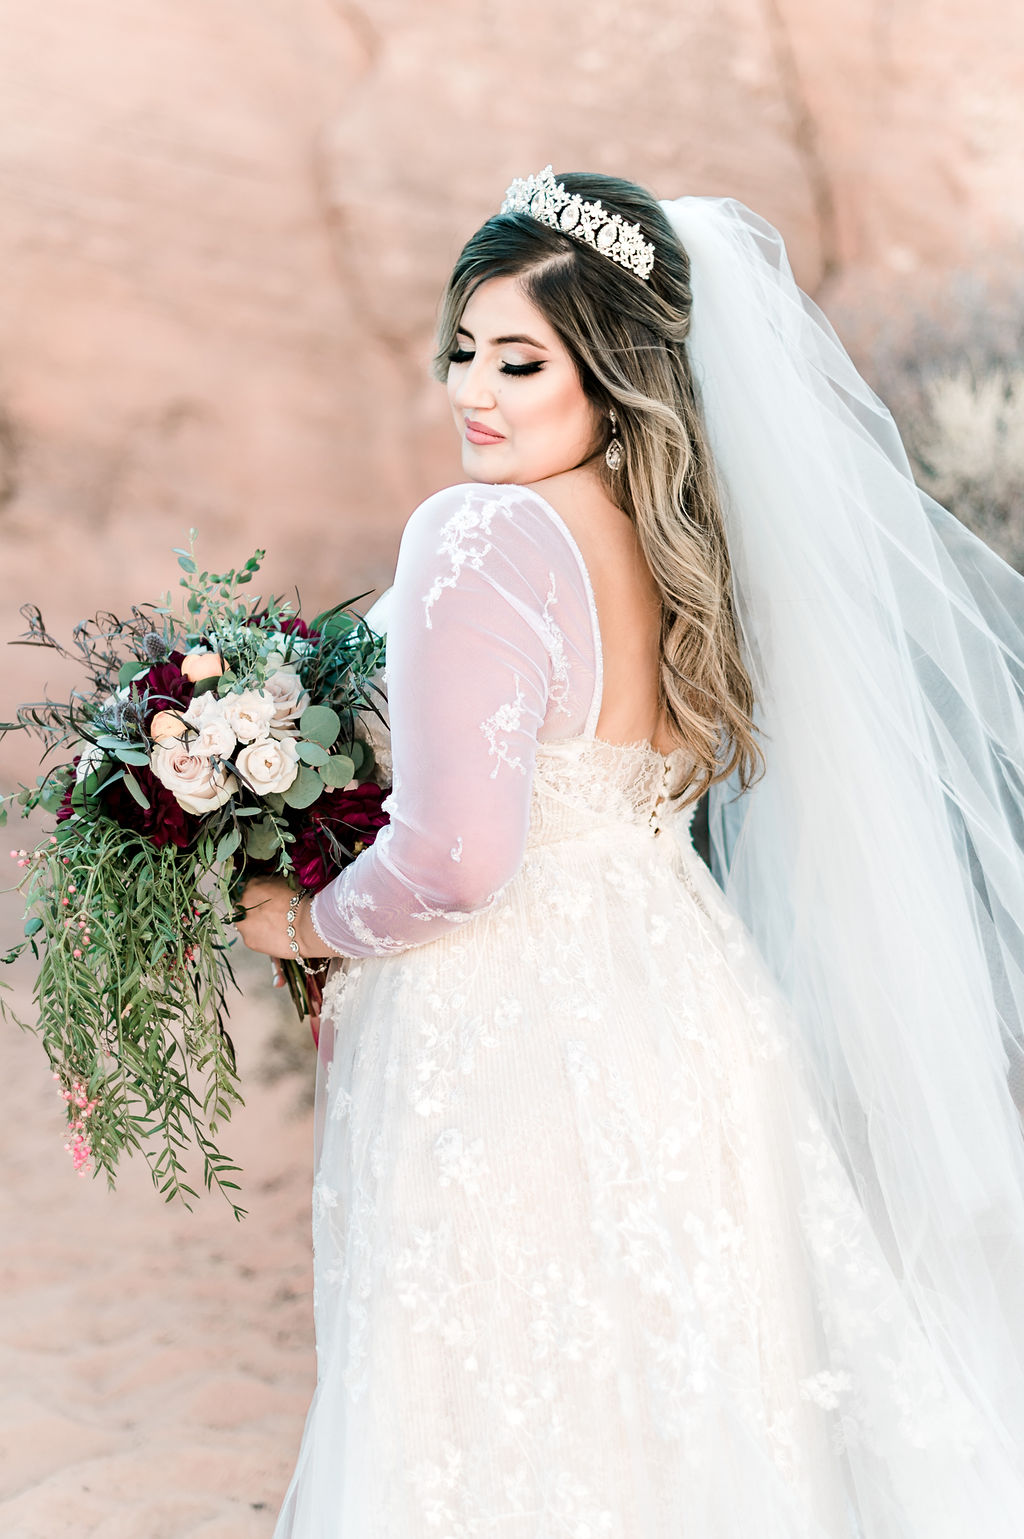 Stunning bride posing with her bouquet during their wedding shoot in Las Vegas